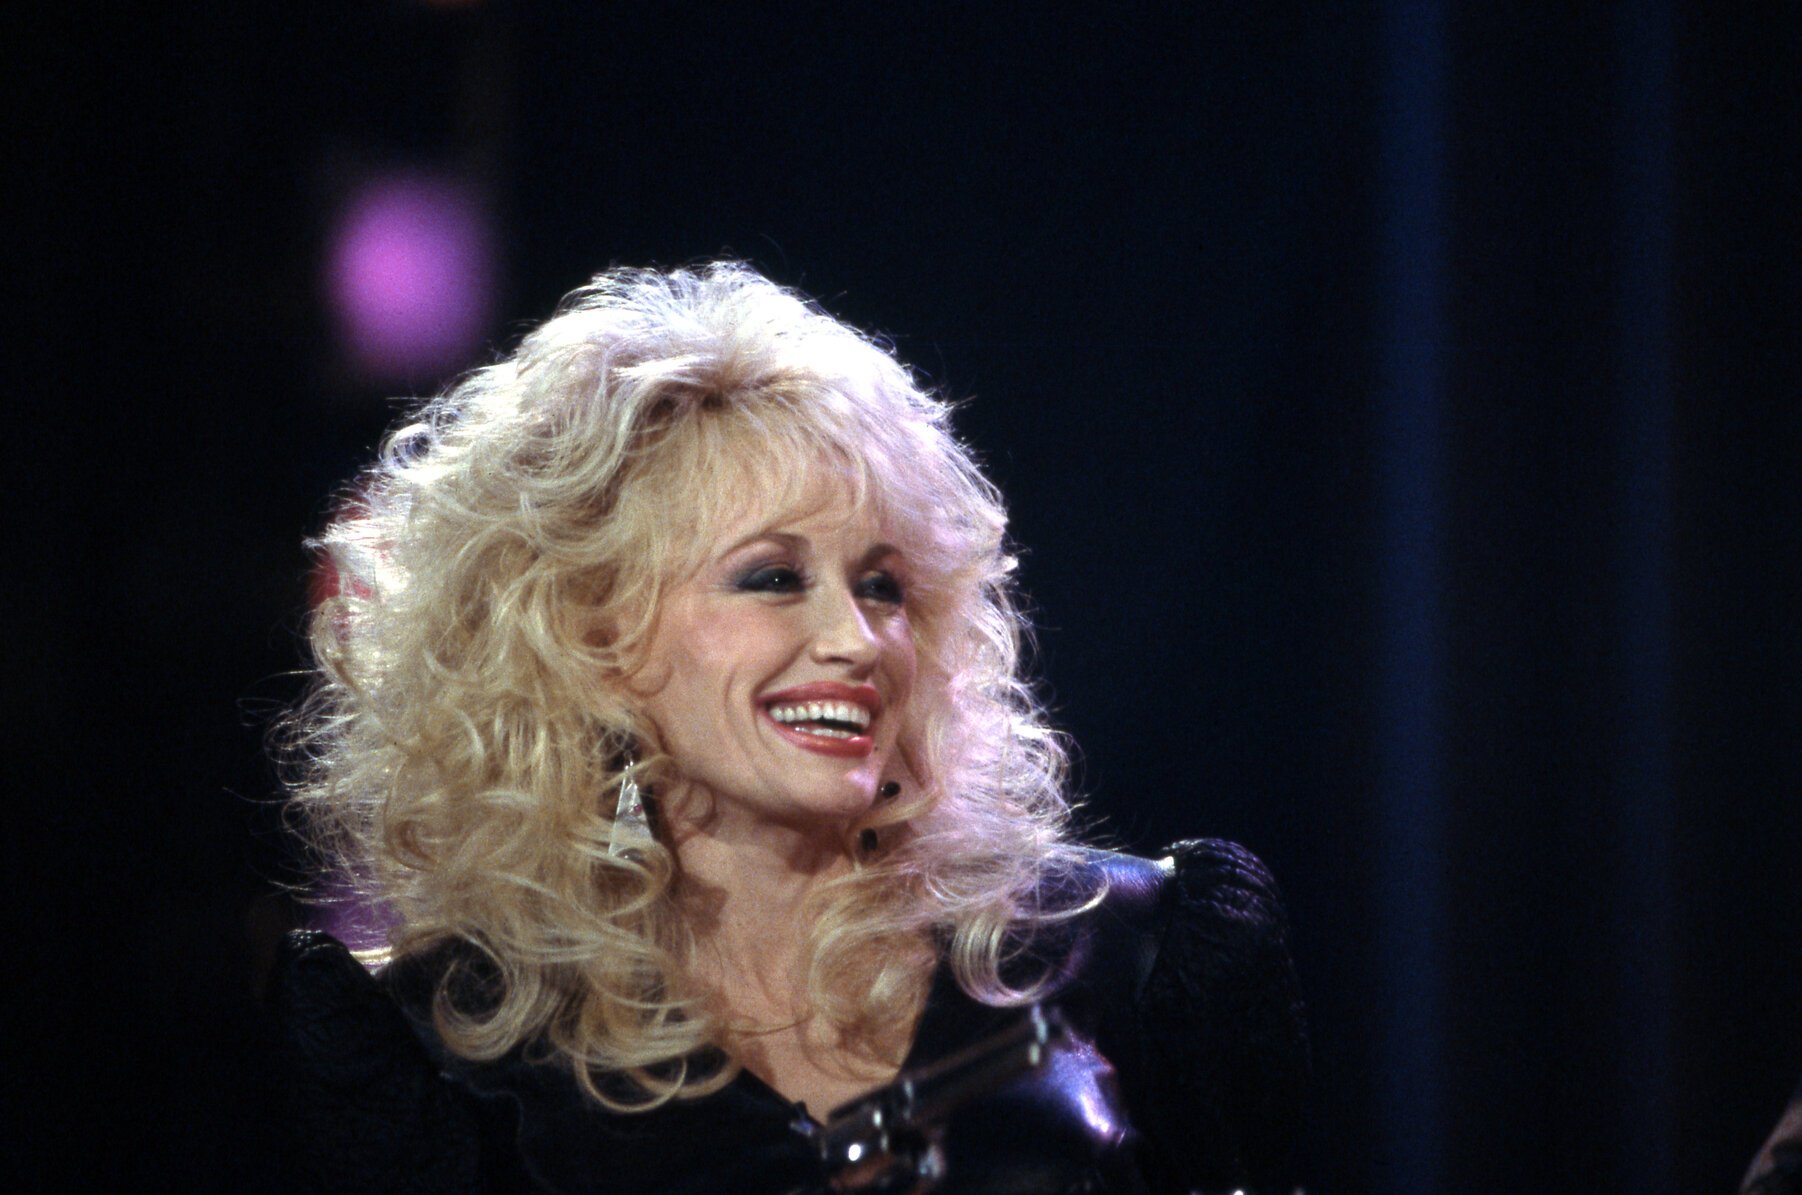 Dolly Parton in 1988. She's wearing a black blouse, big, teased hair, and an open-mouthed smile on her face. She's in front of a black background.